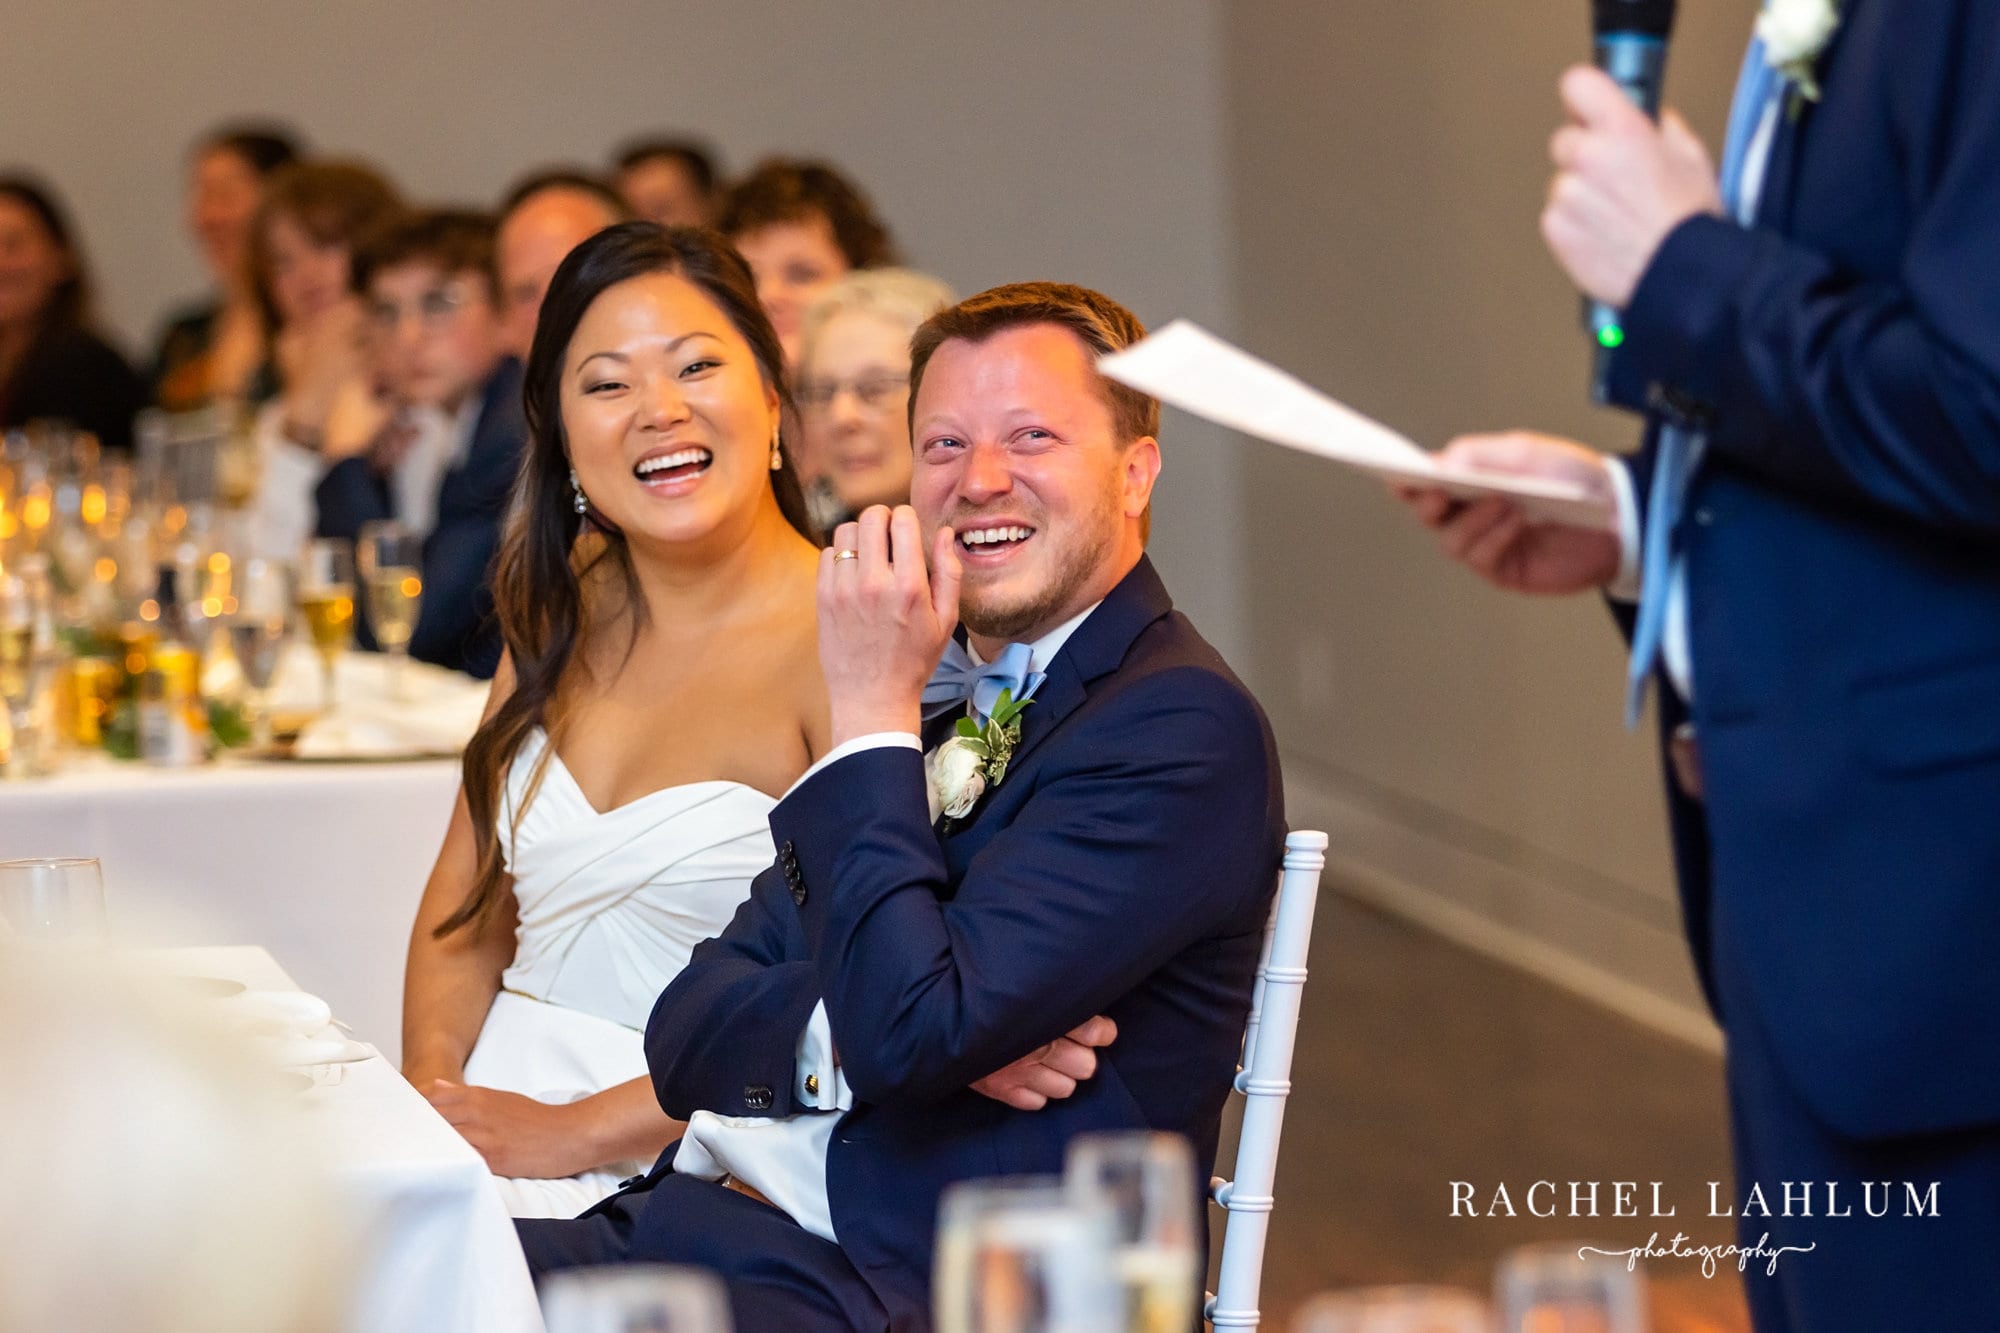 Bride and groom laugh during speeches during reception at The Blaisdell.